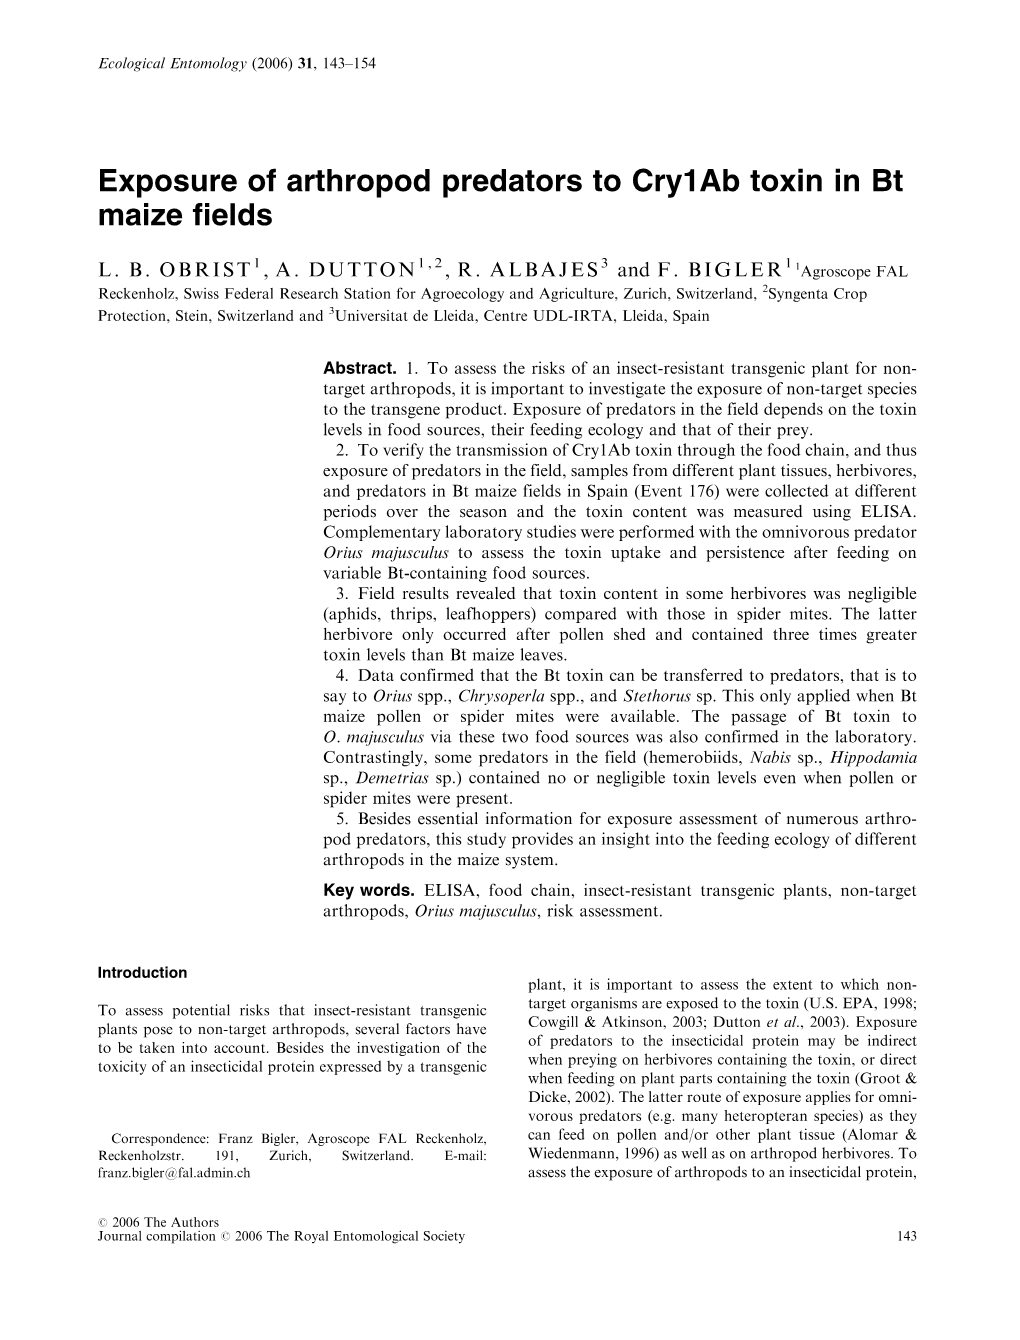 Exposure of Arthropod Predators to Cry1ab Toxin in Bt Maize Fields